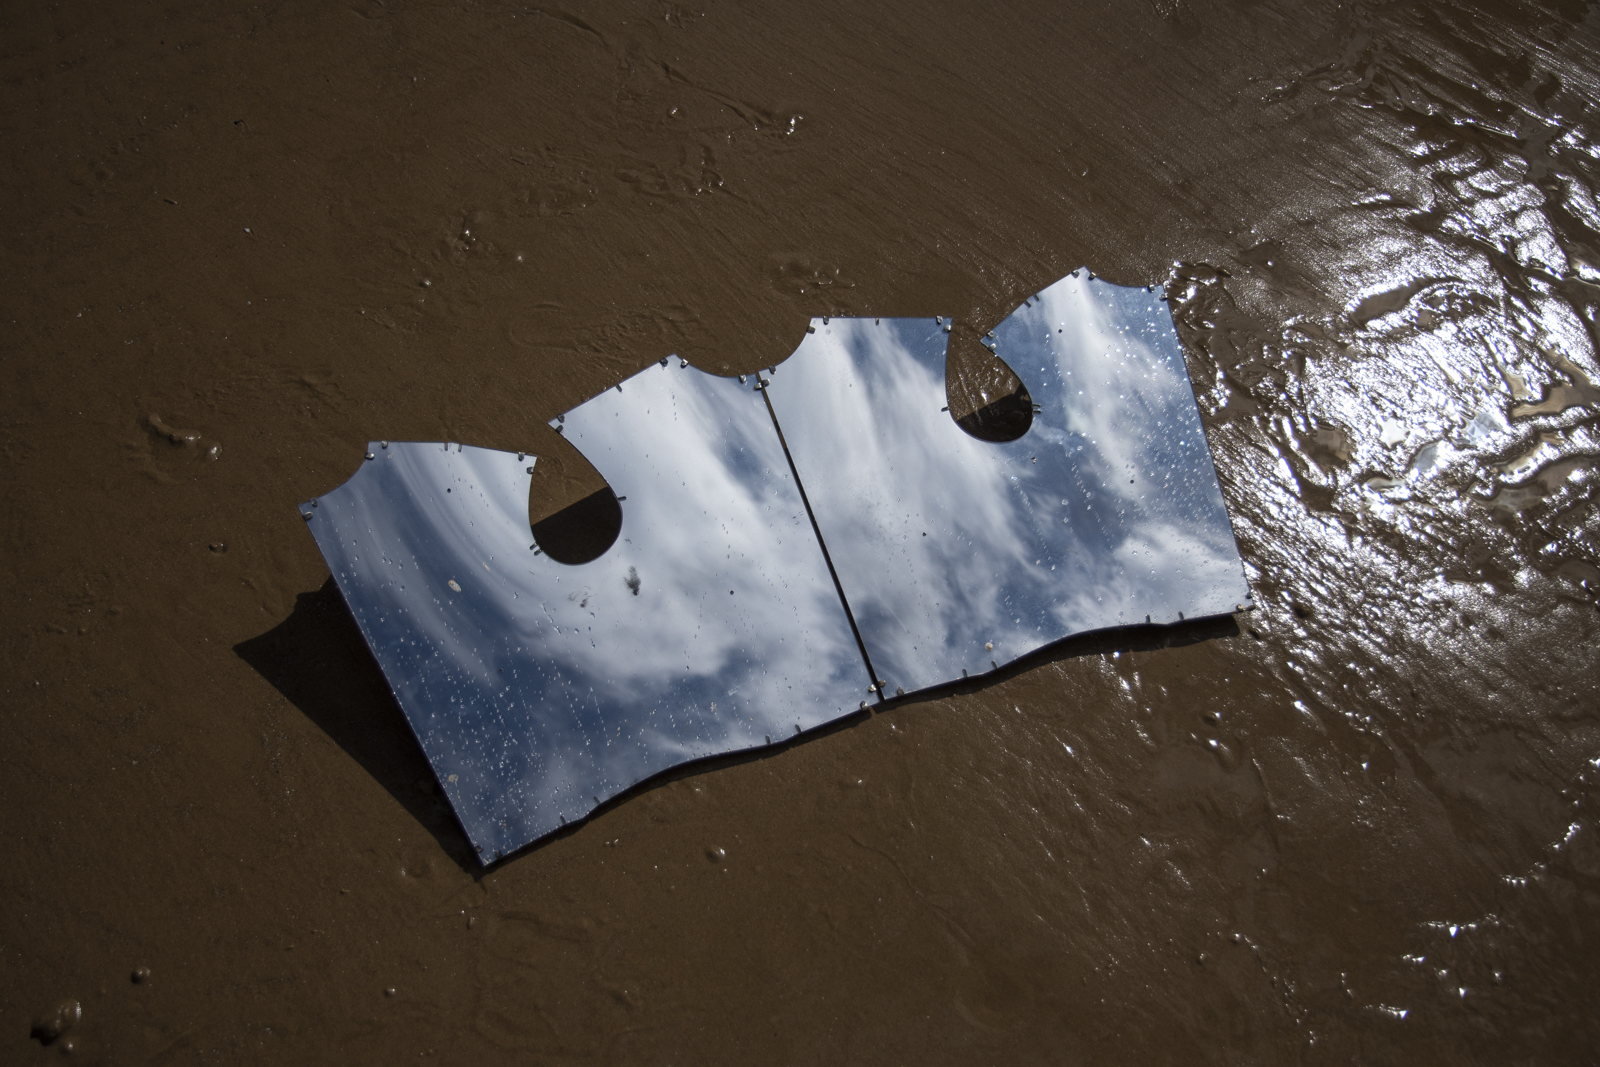 two mirrors in the shape of a bodice pattern are propped up on some brown sand. Clouds and blue sky are visible in the reflection.